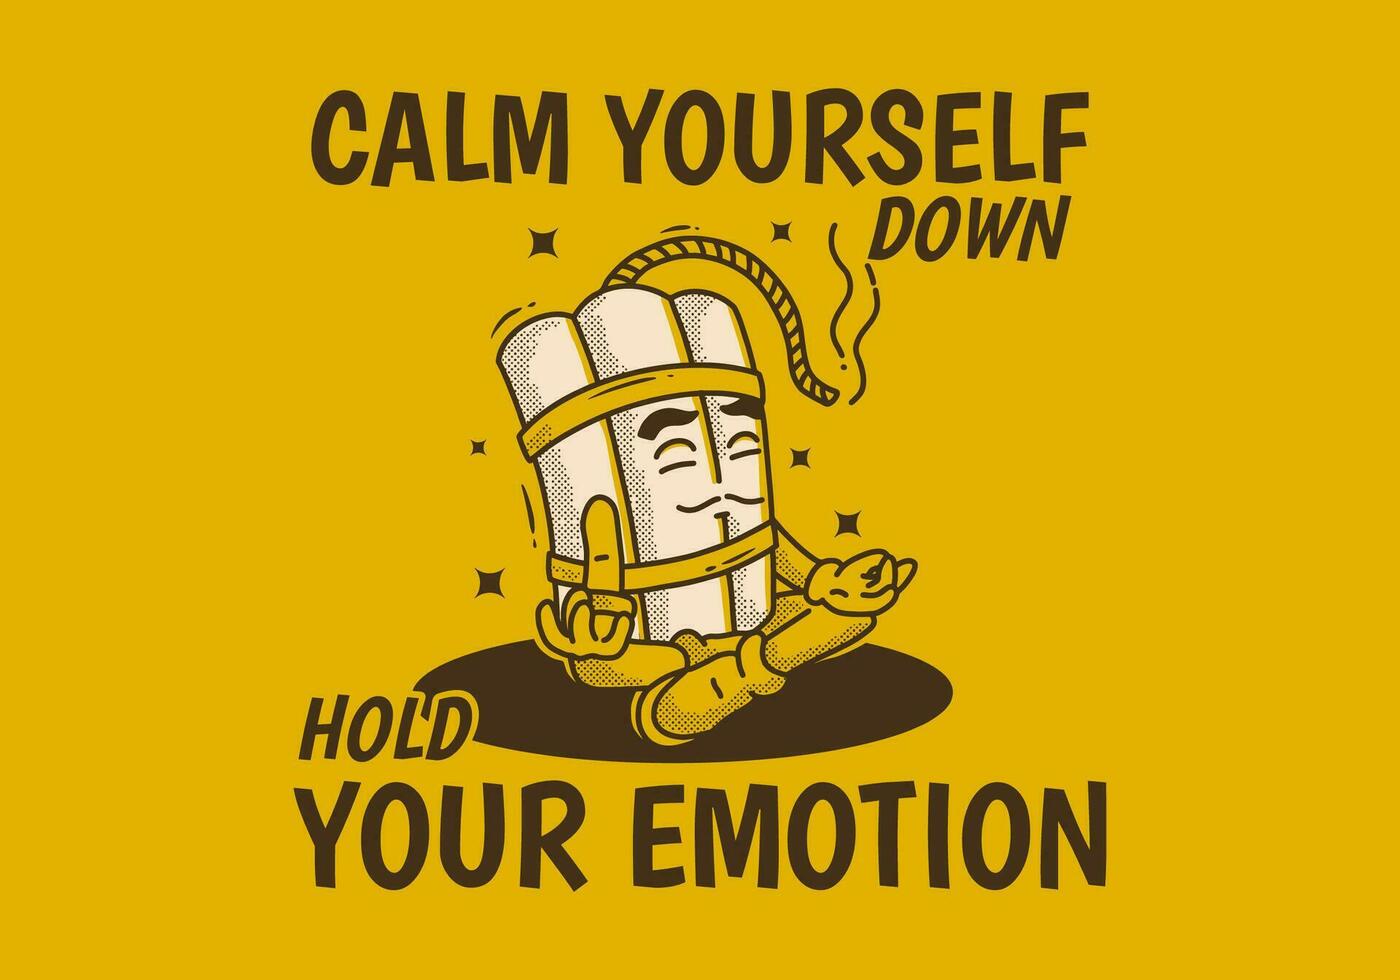 Calm yourself down hold your emotion. Character design of tnt dynamite in meditation pose vector